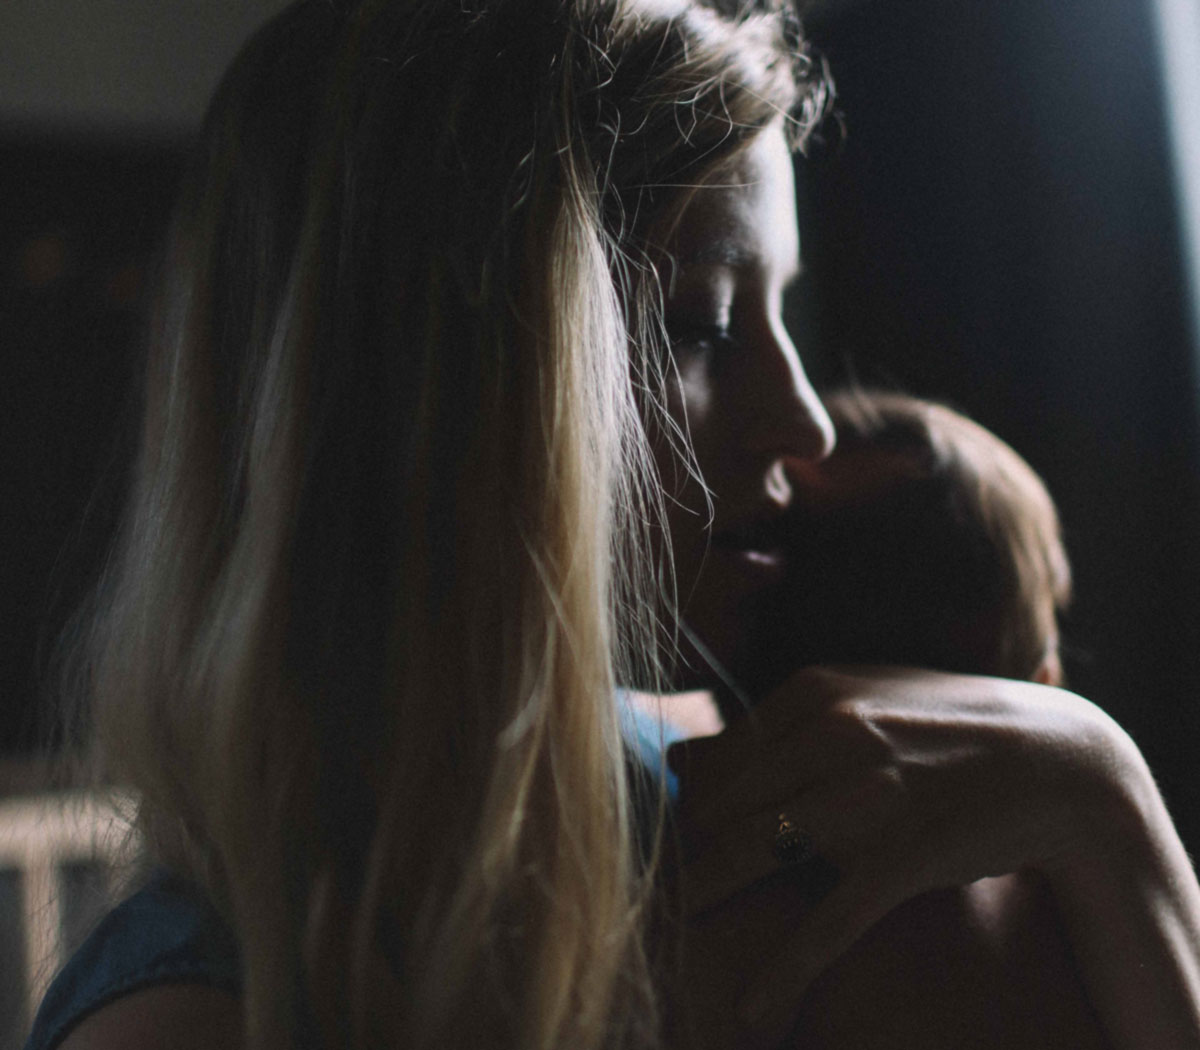 Caption: A mother’s trauma impacts the mother-child relationship and increases the chances of transmitting somatisation. Photo by Jenna Norman on Unsplash